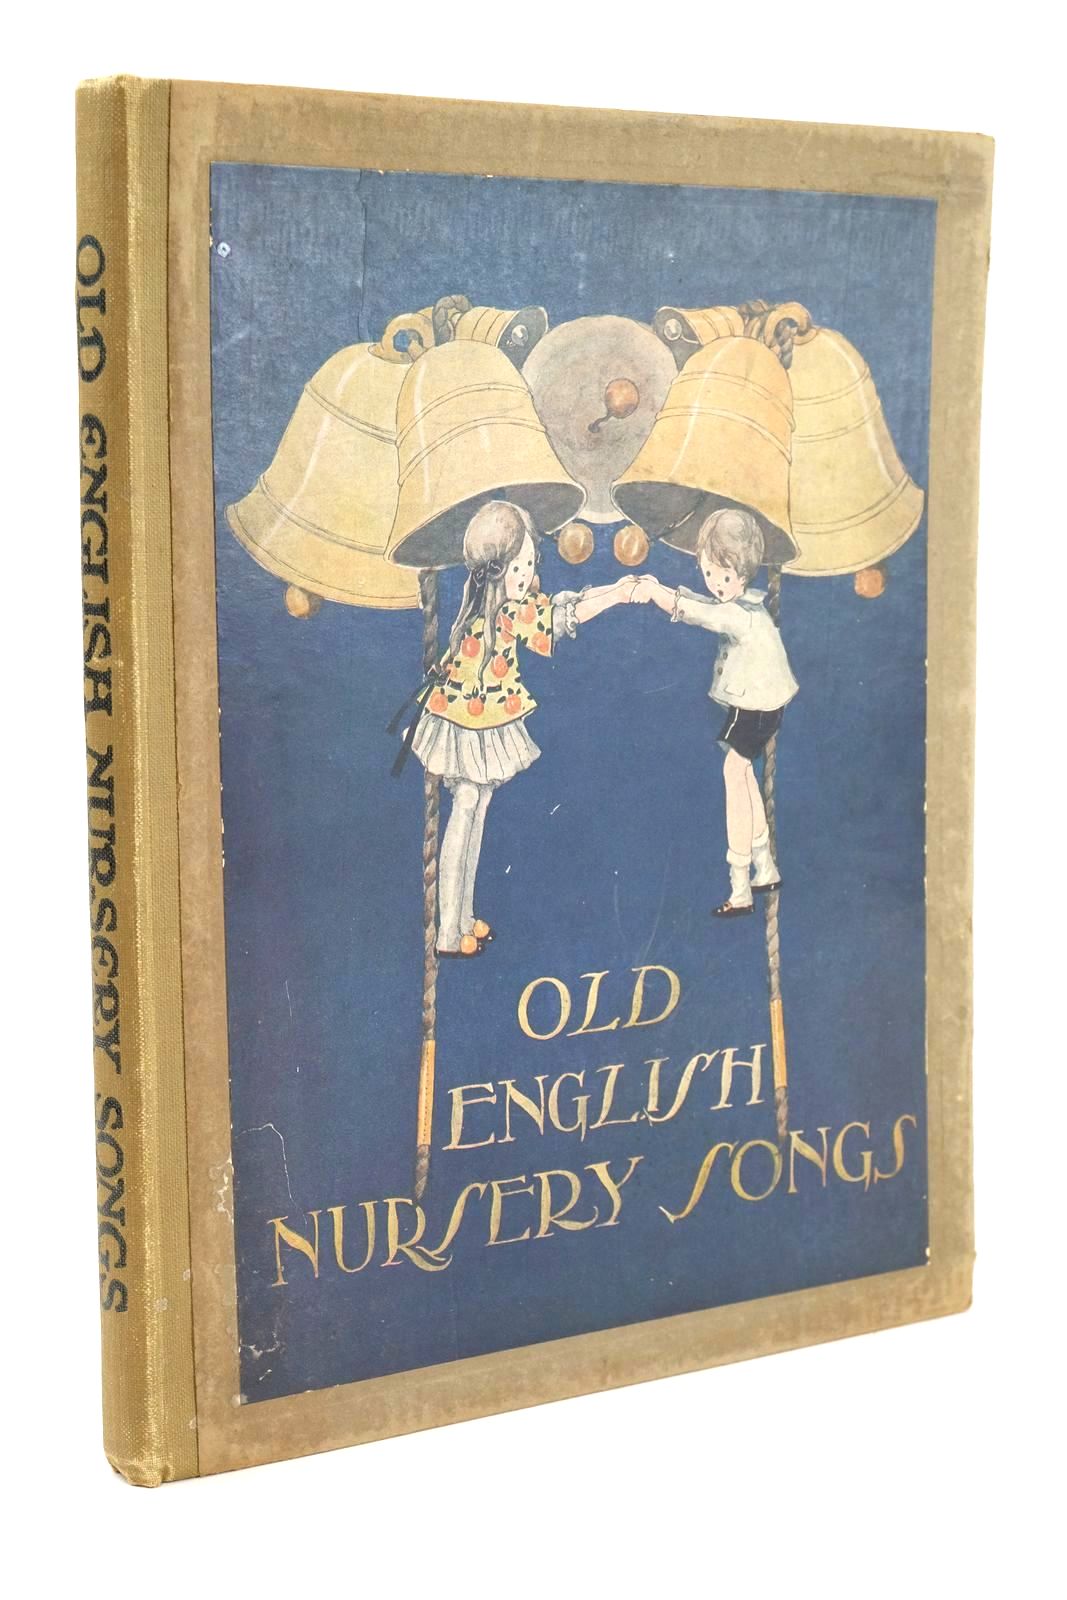 Photo of OLD ENGLISH NURSERY SONGS written by Mansion, Horace illustrated by Anderson, Anne published by George G. Harrap &amp; Co. Ltd. (STOCK CODE: 1324627)  for sale by Stella & Rose's Books